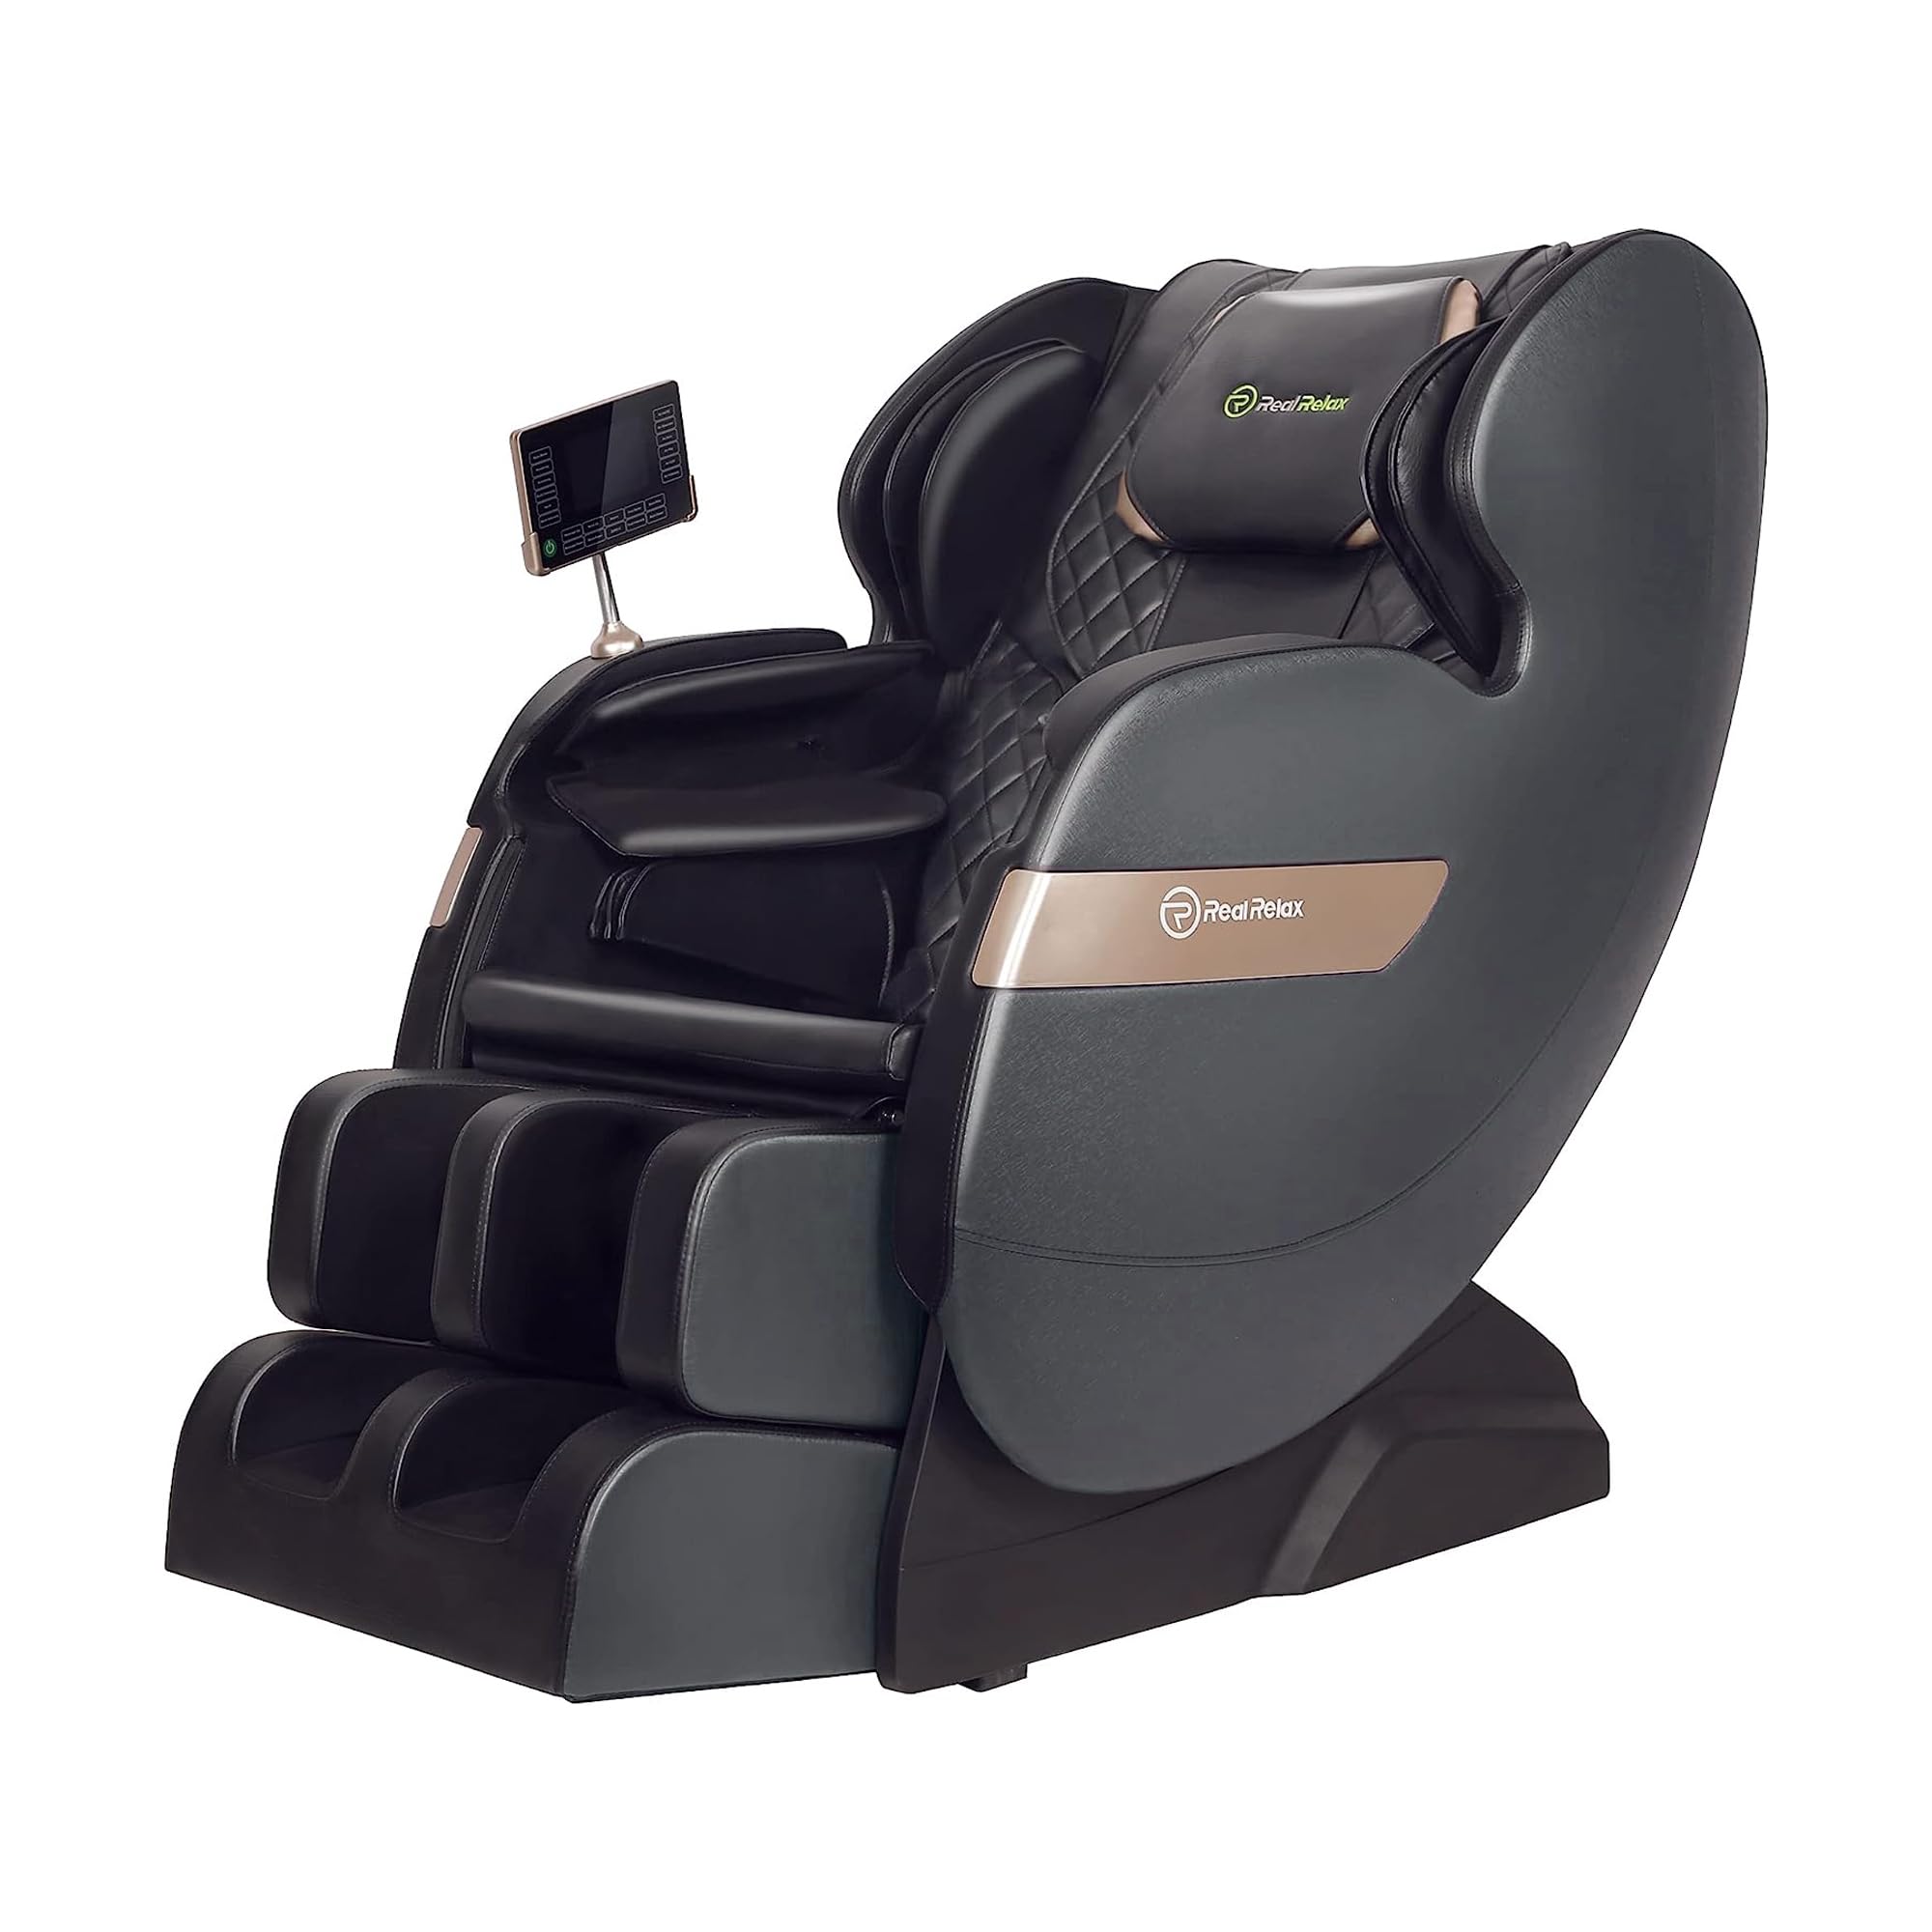 You are currently viewing Massage Chair Vs Recliner : Ultimate Relaxation Duel